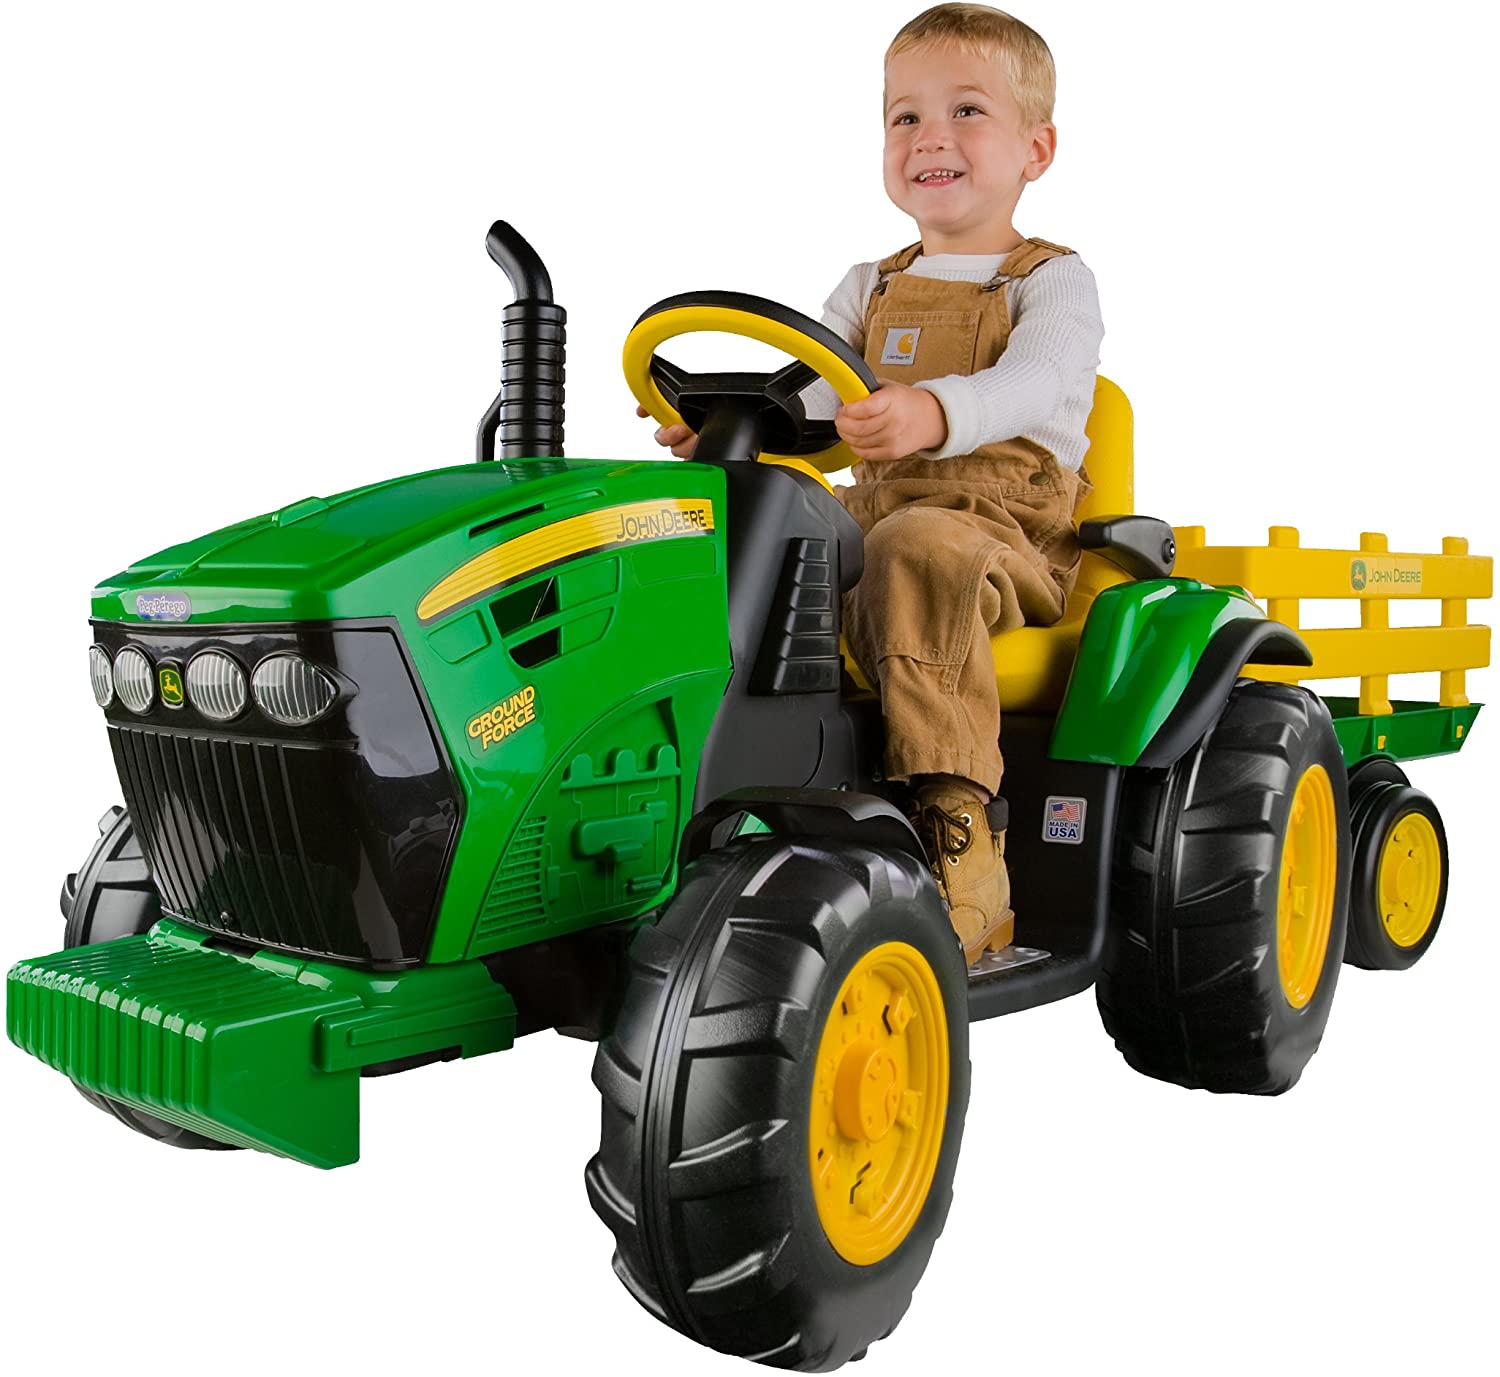 Top 15 Best Kids Riding Tractors in [year] Reviews 1